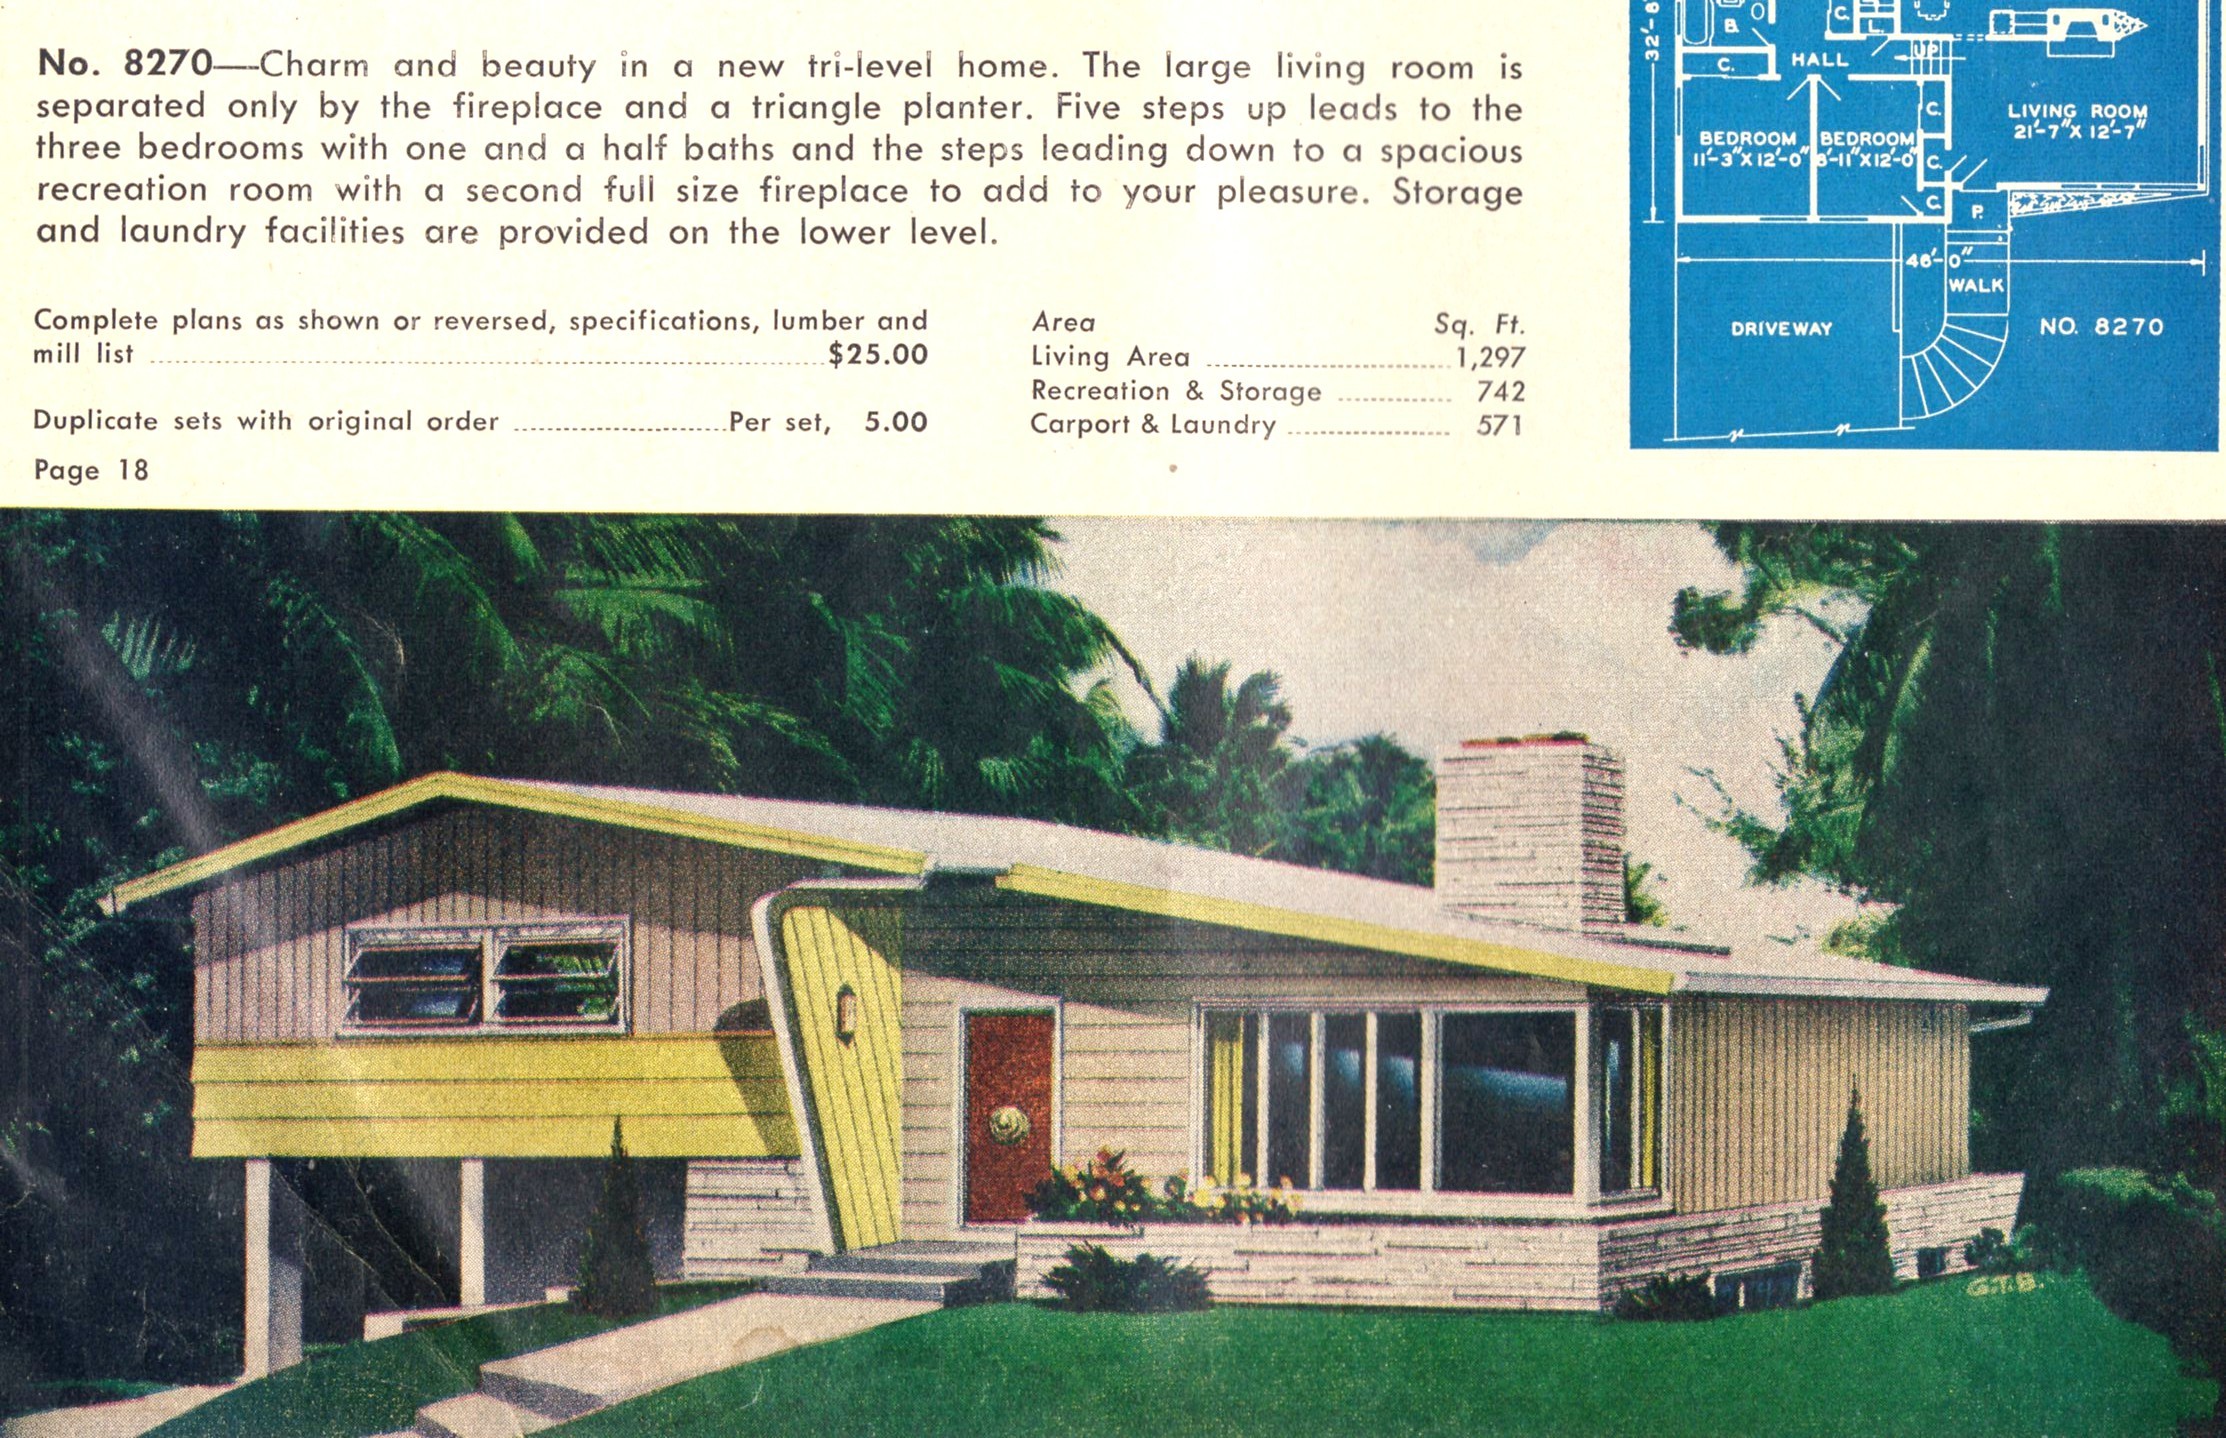 the vintage house was featured in an old magazine